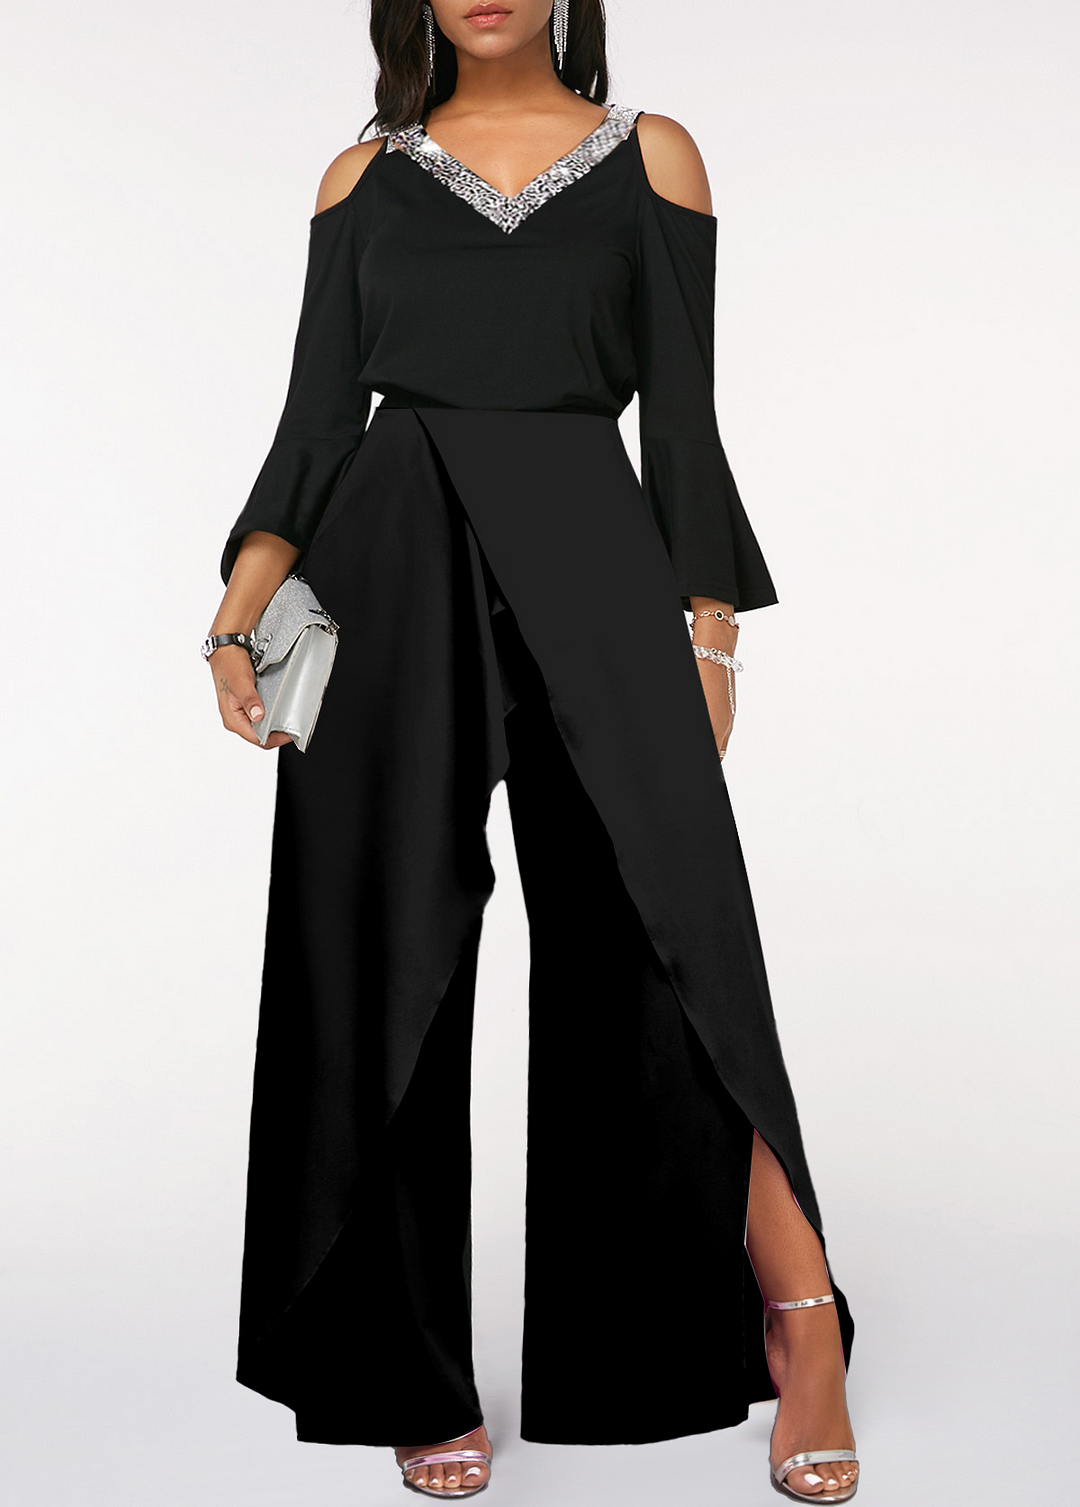 Miabel Chic Black V Neck Long Sleeves Jump Suit